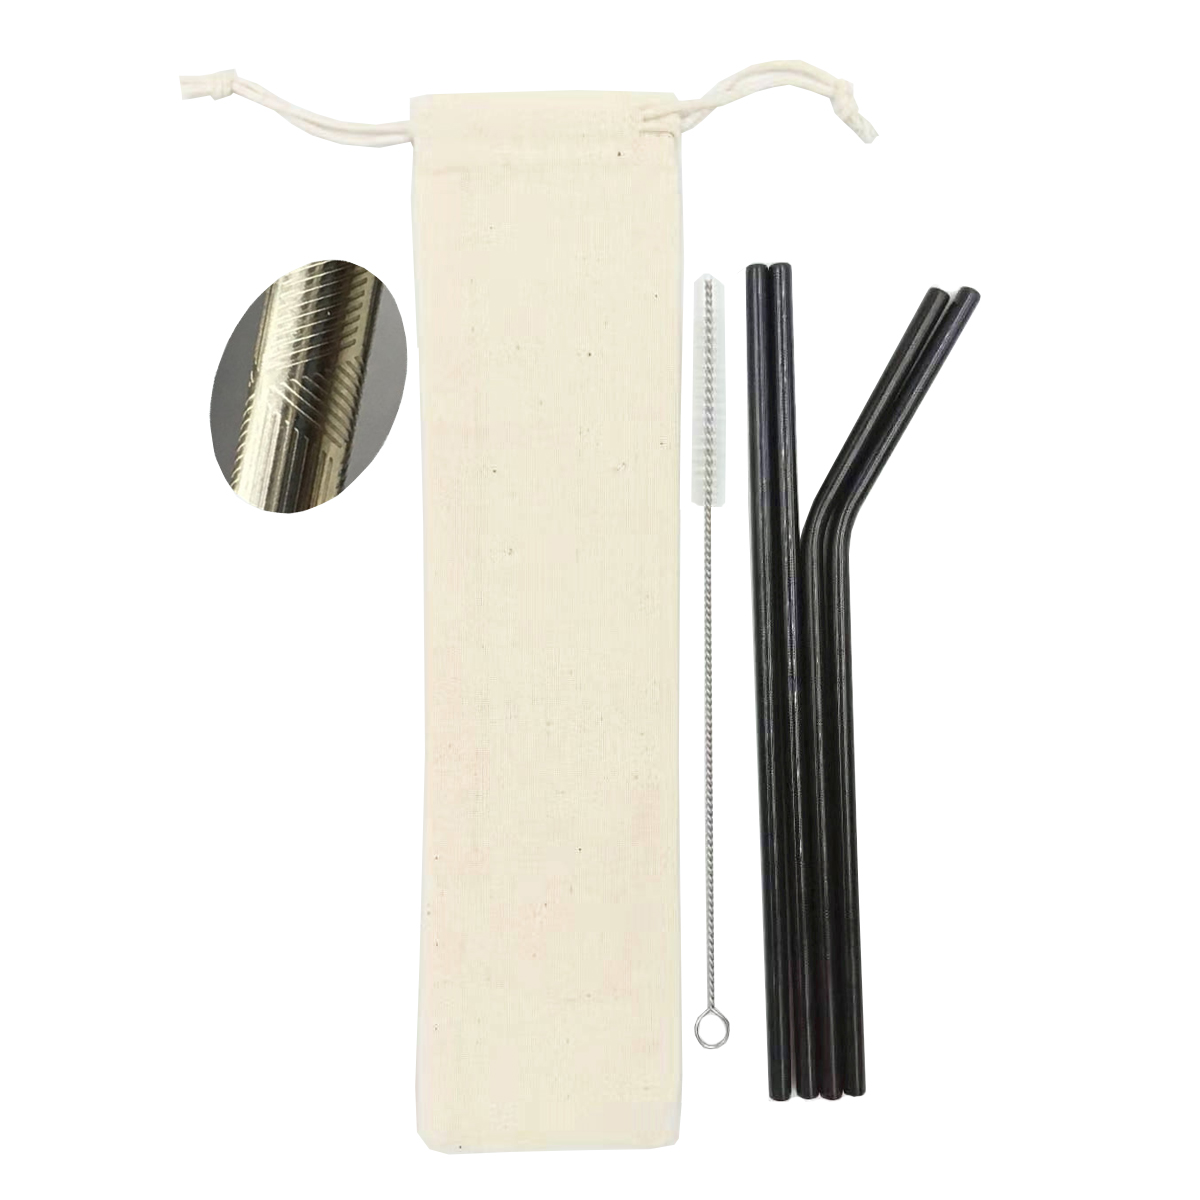 Black Stainless Steel Straw Set with decorative pattern